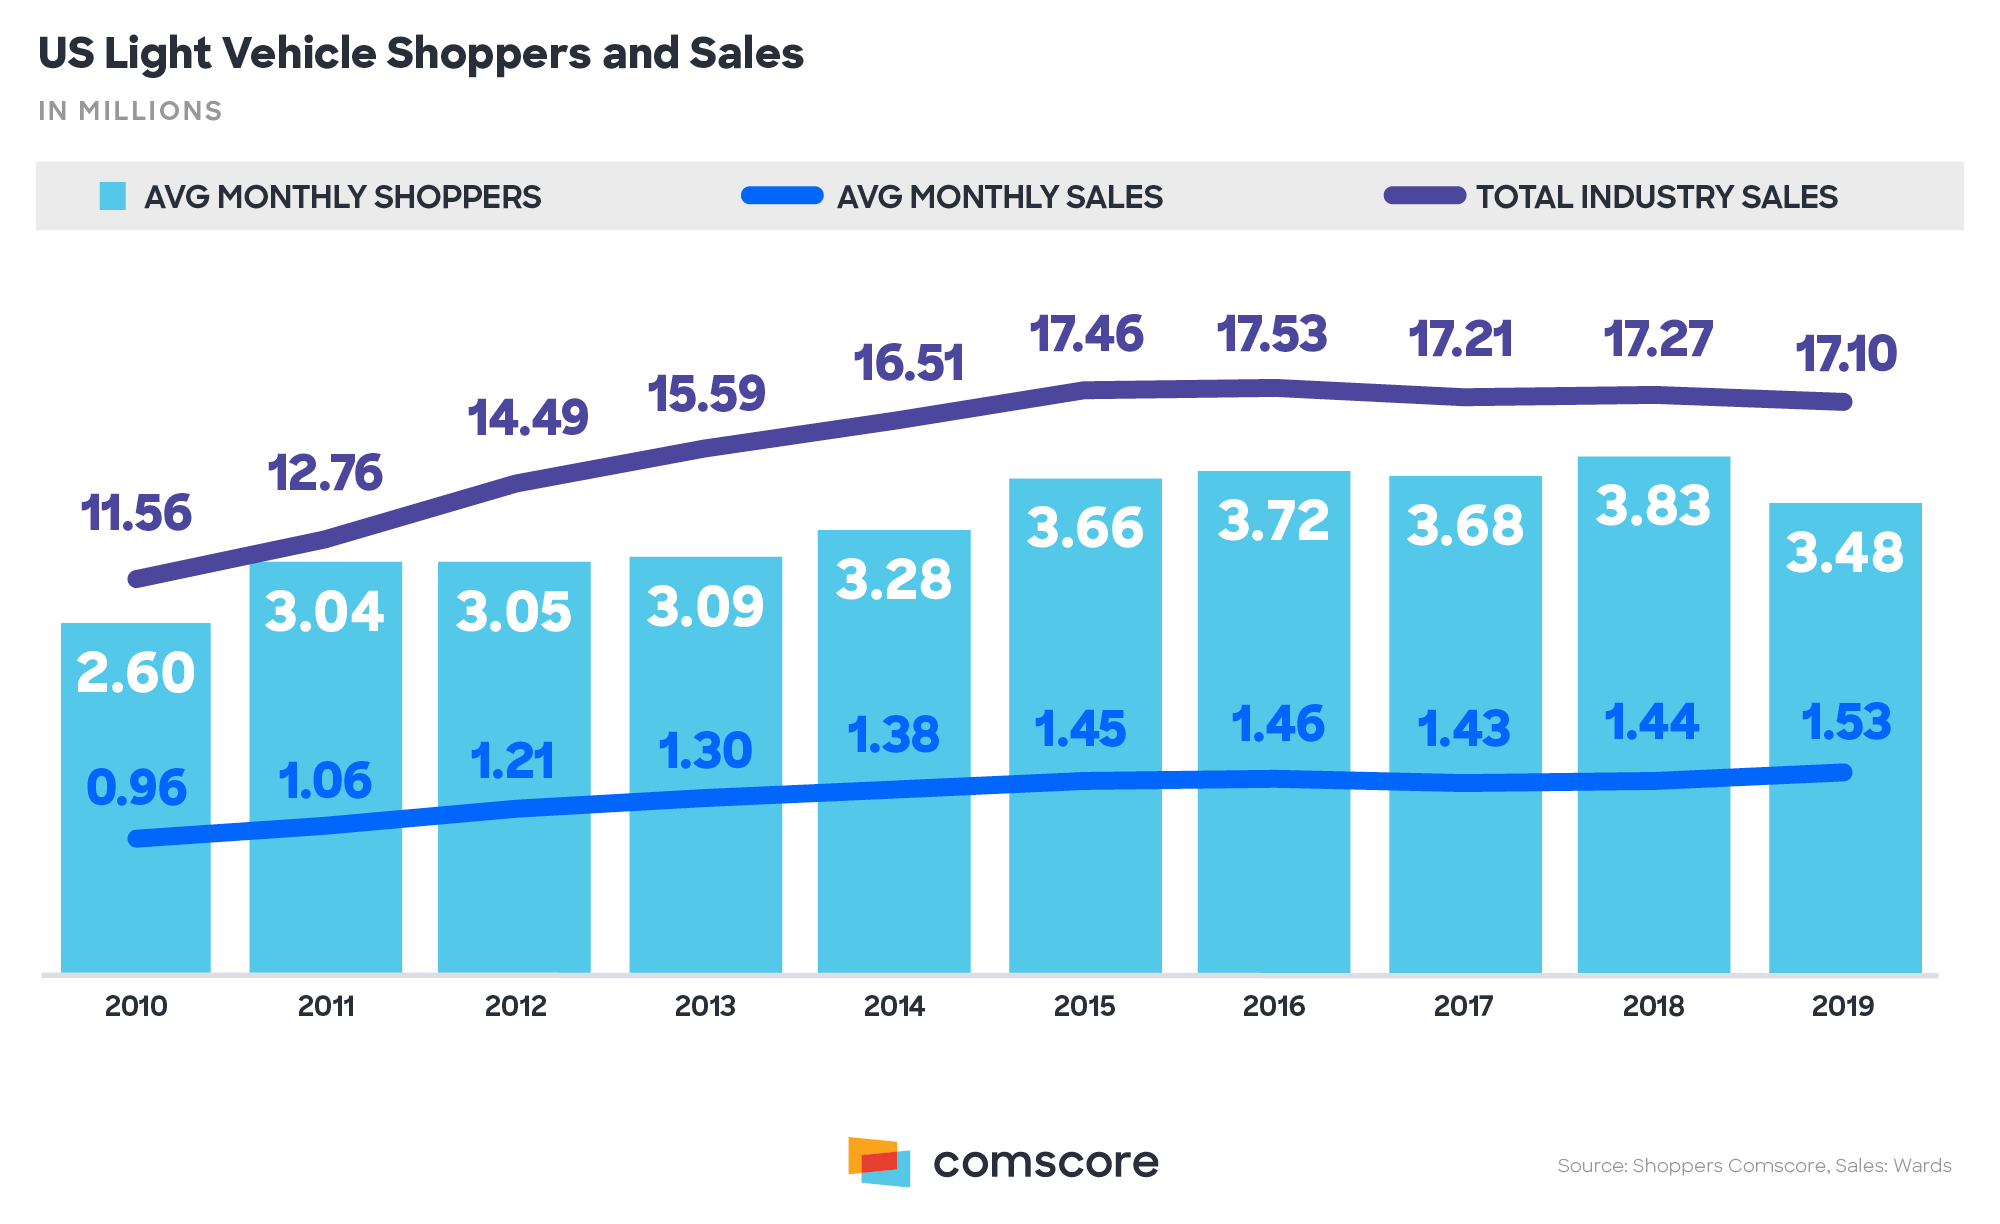 US light Vehicle Shoppers and Sales